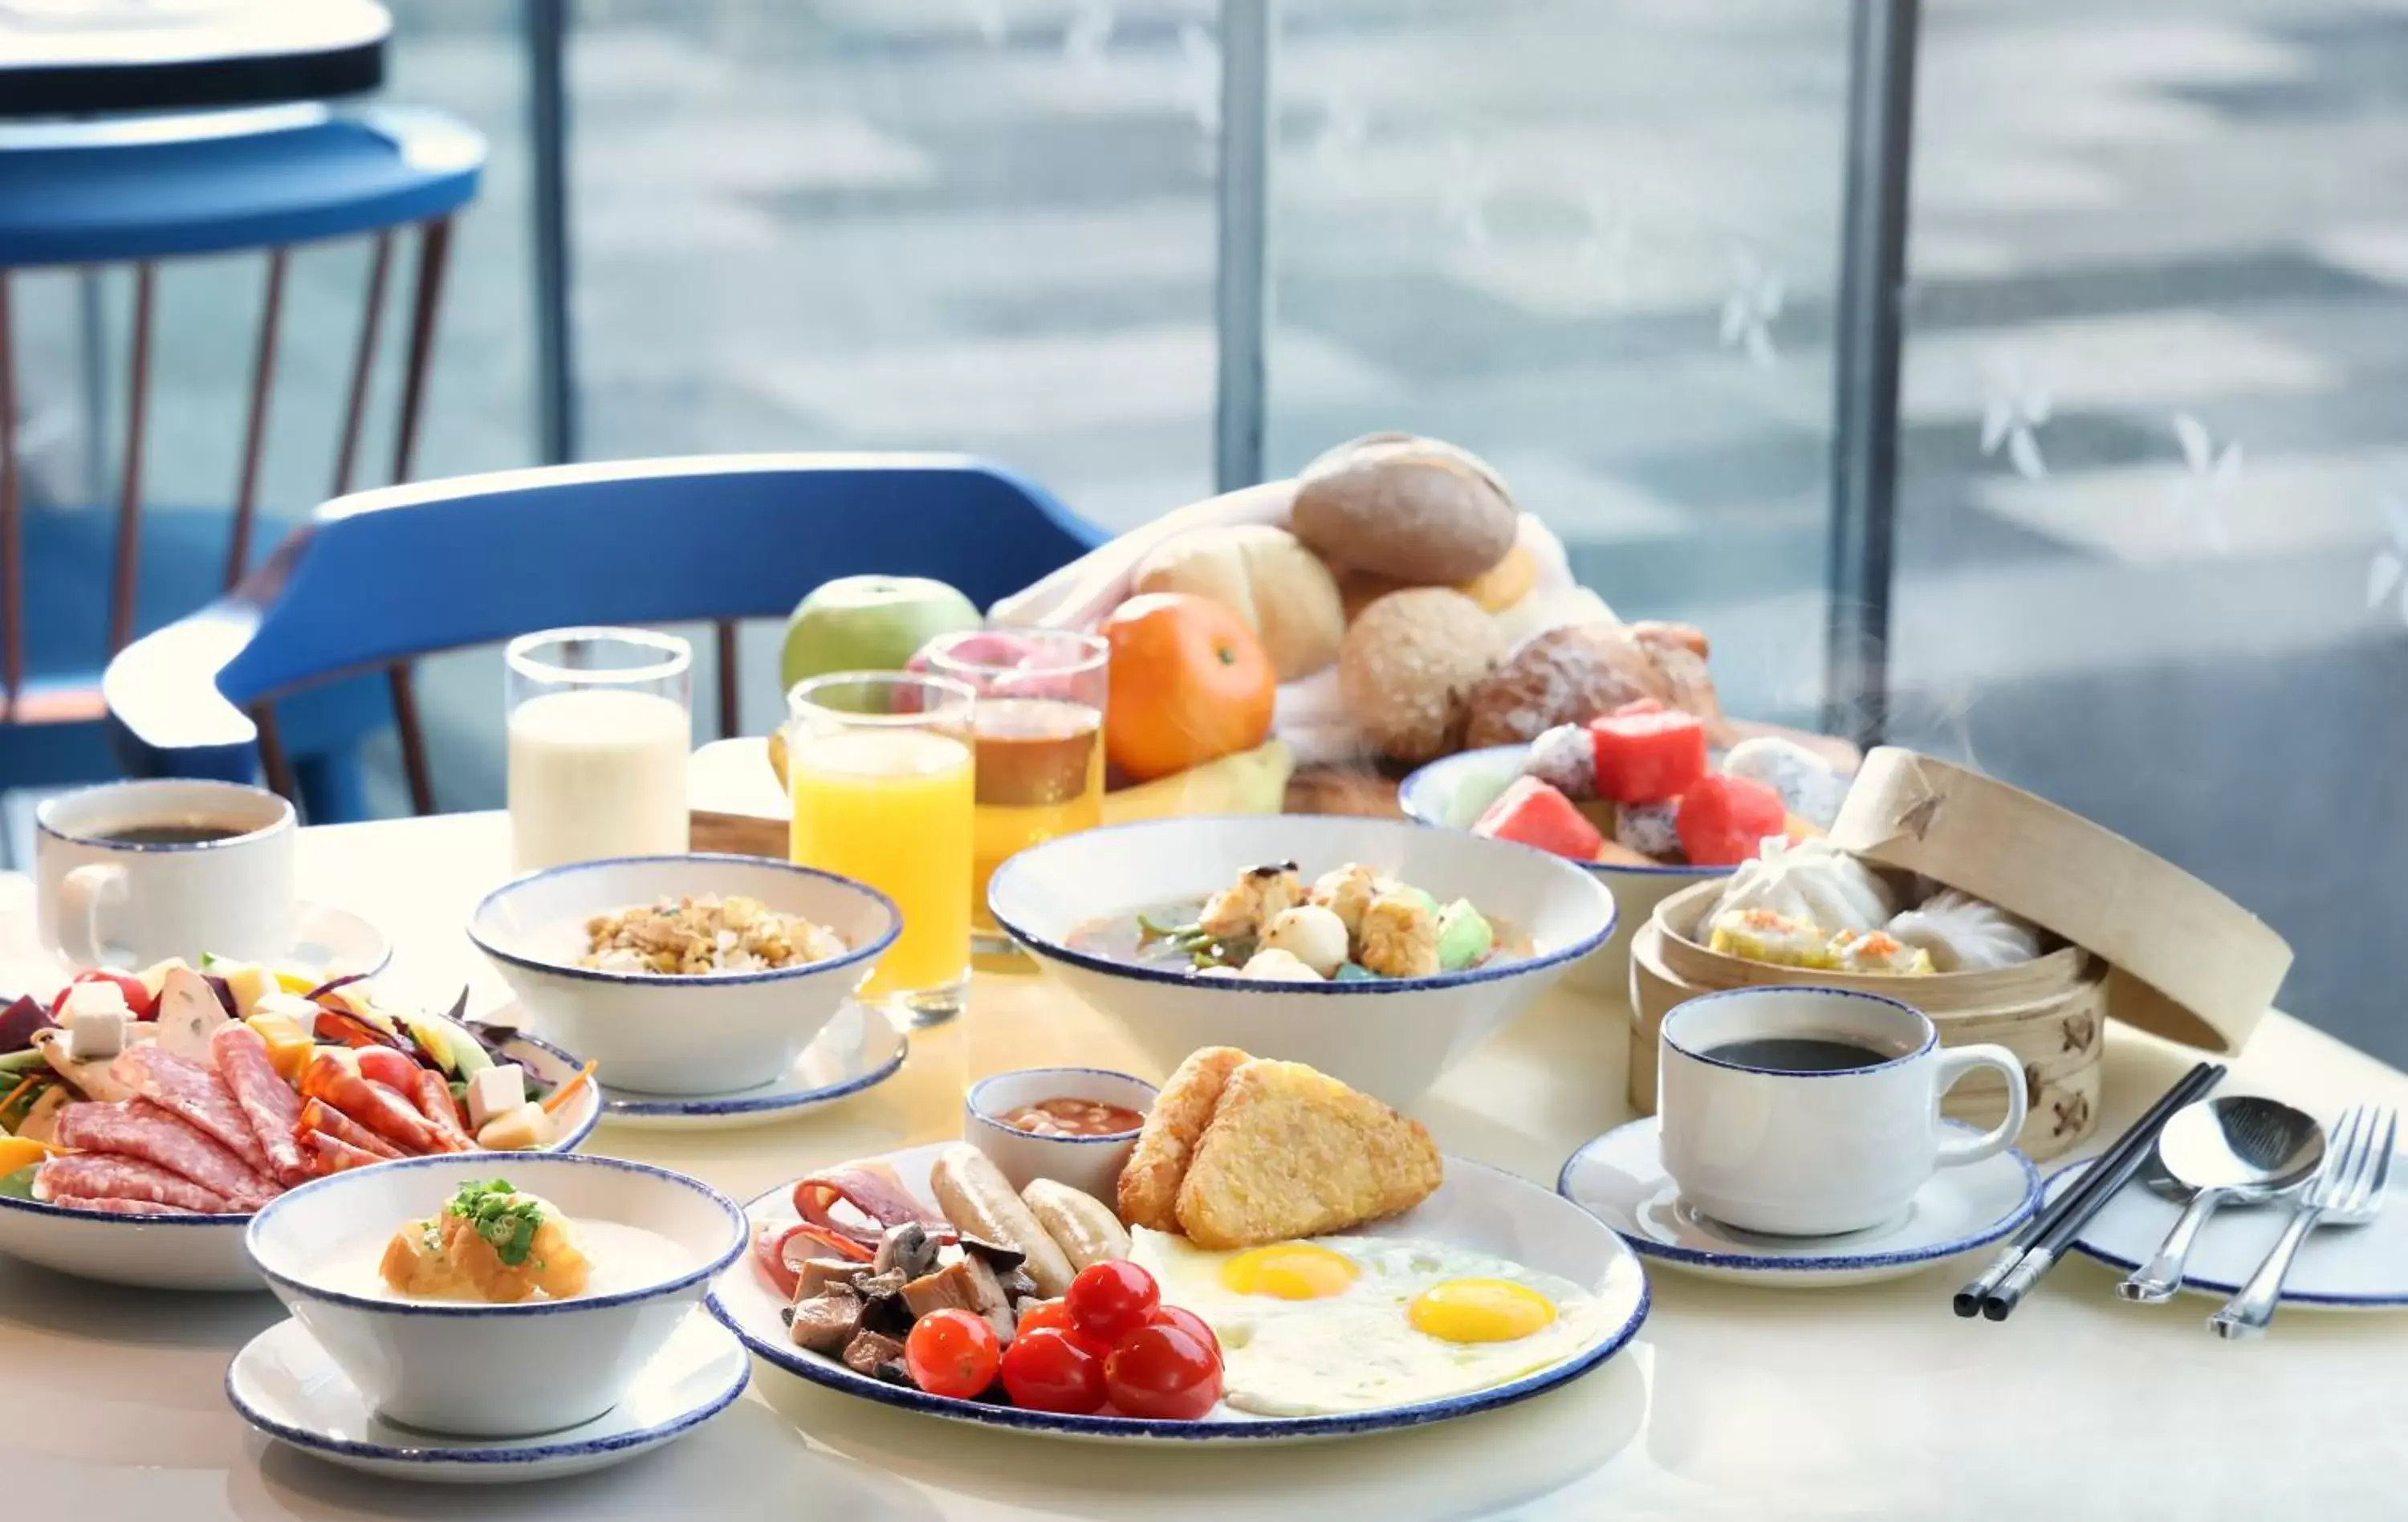 Breakfast in Four Points by Sheraton Hong Kong, Tung Chung